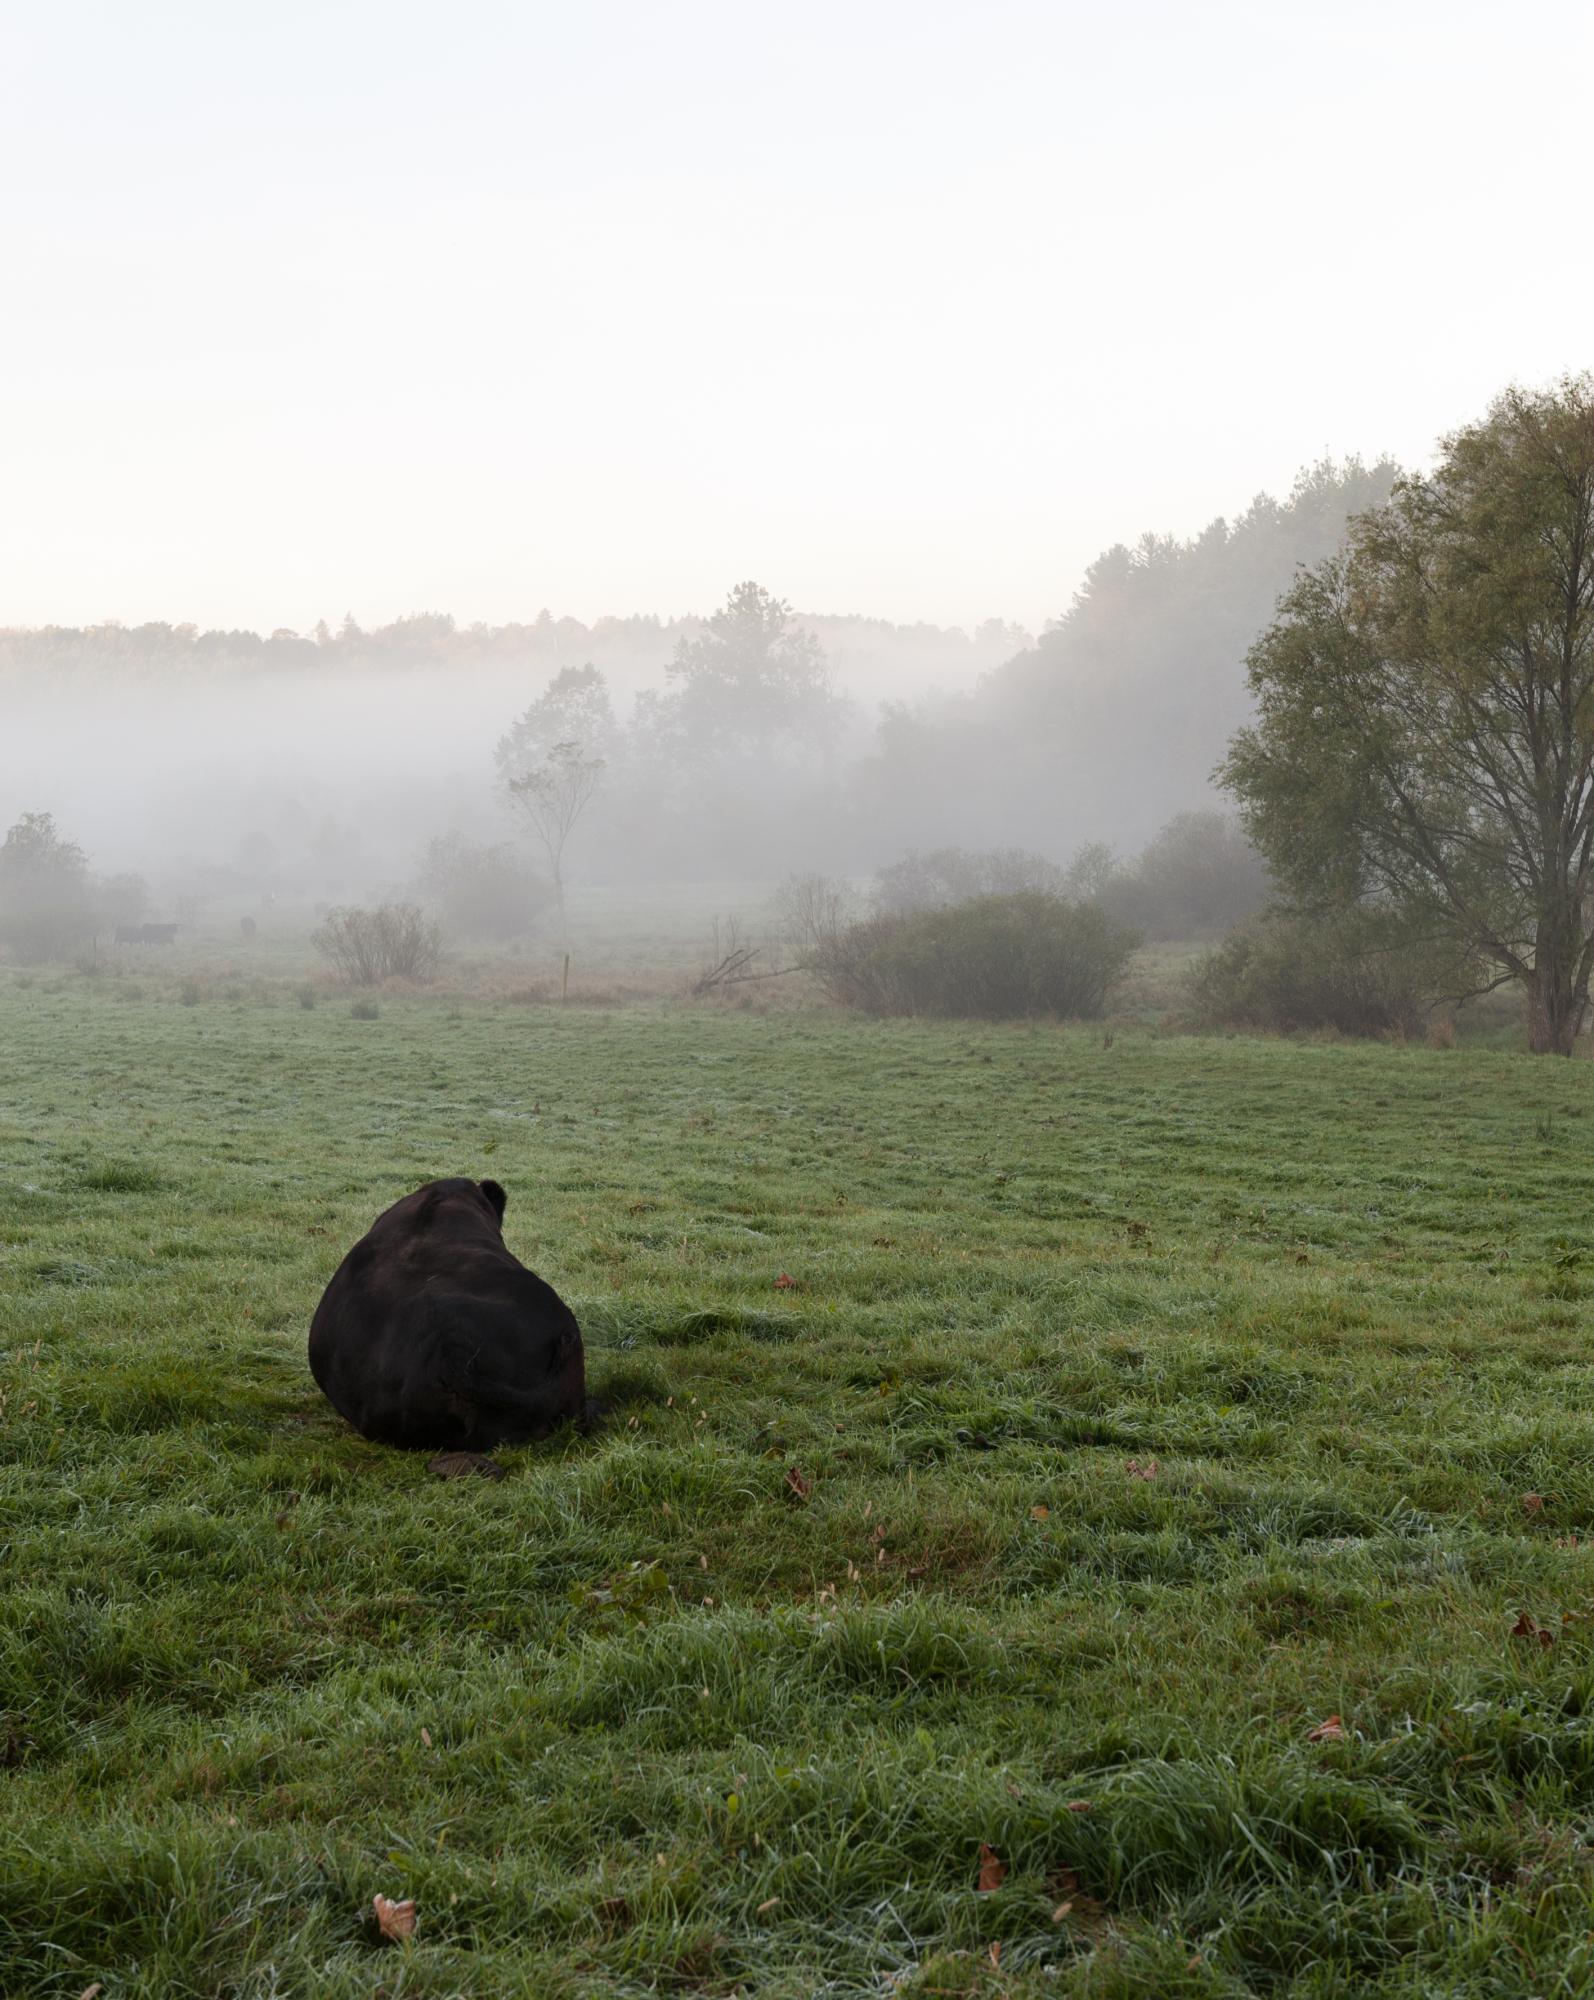 Considered - A cow relaxes in the morning mist.